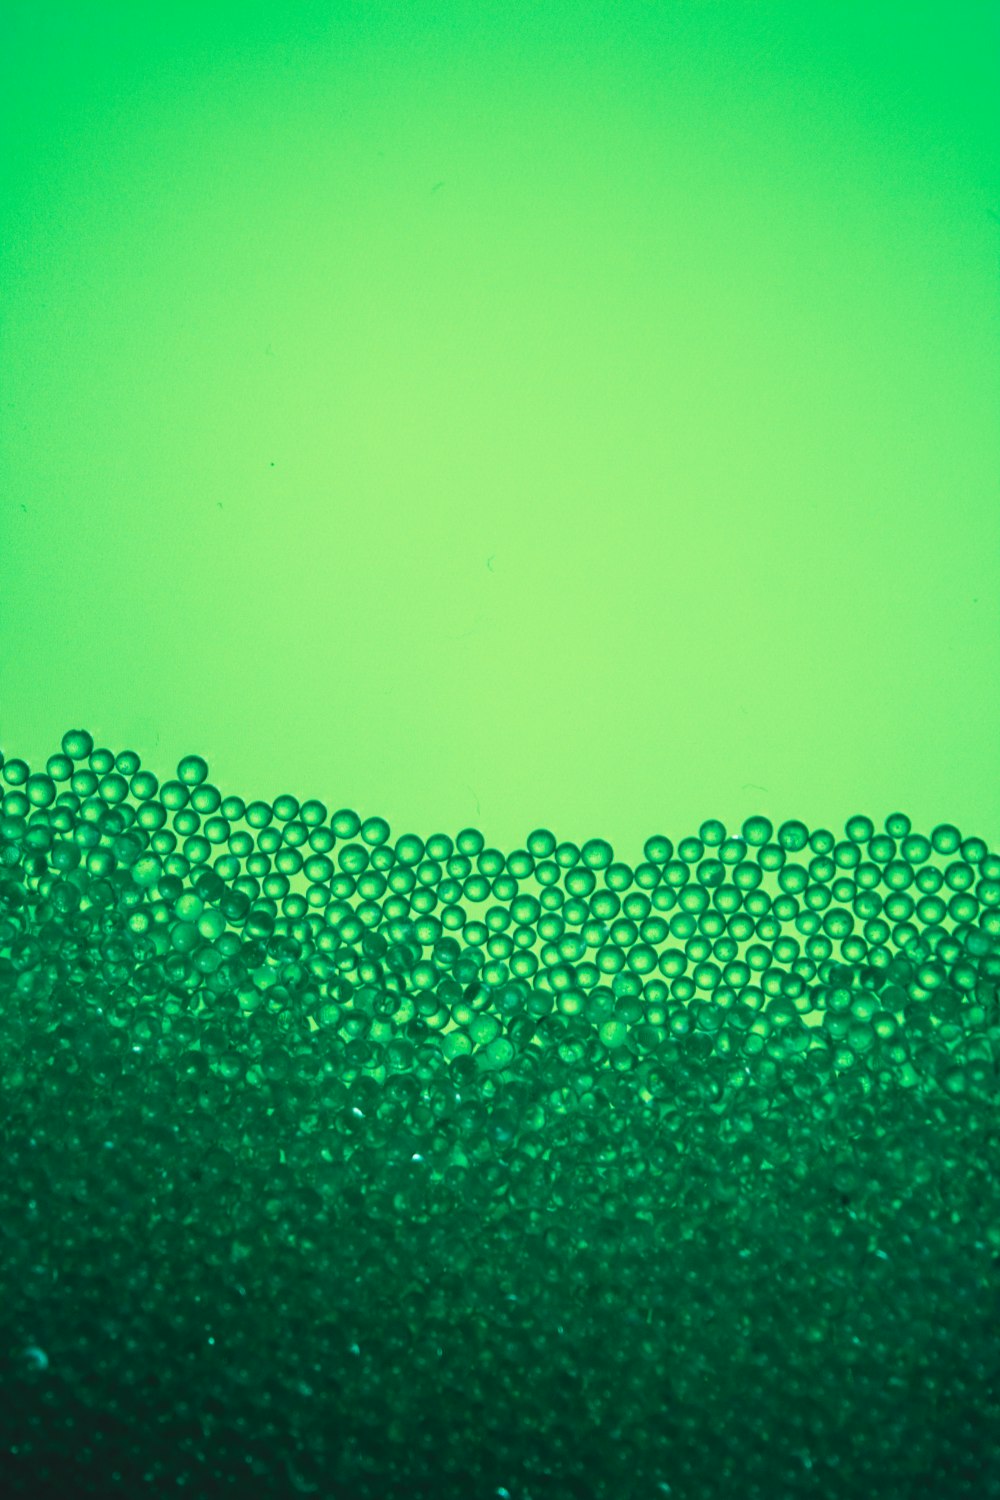 a close up of a green liquid filled with bubbles